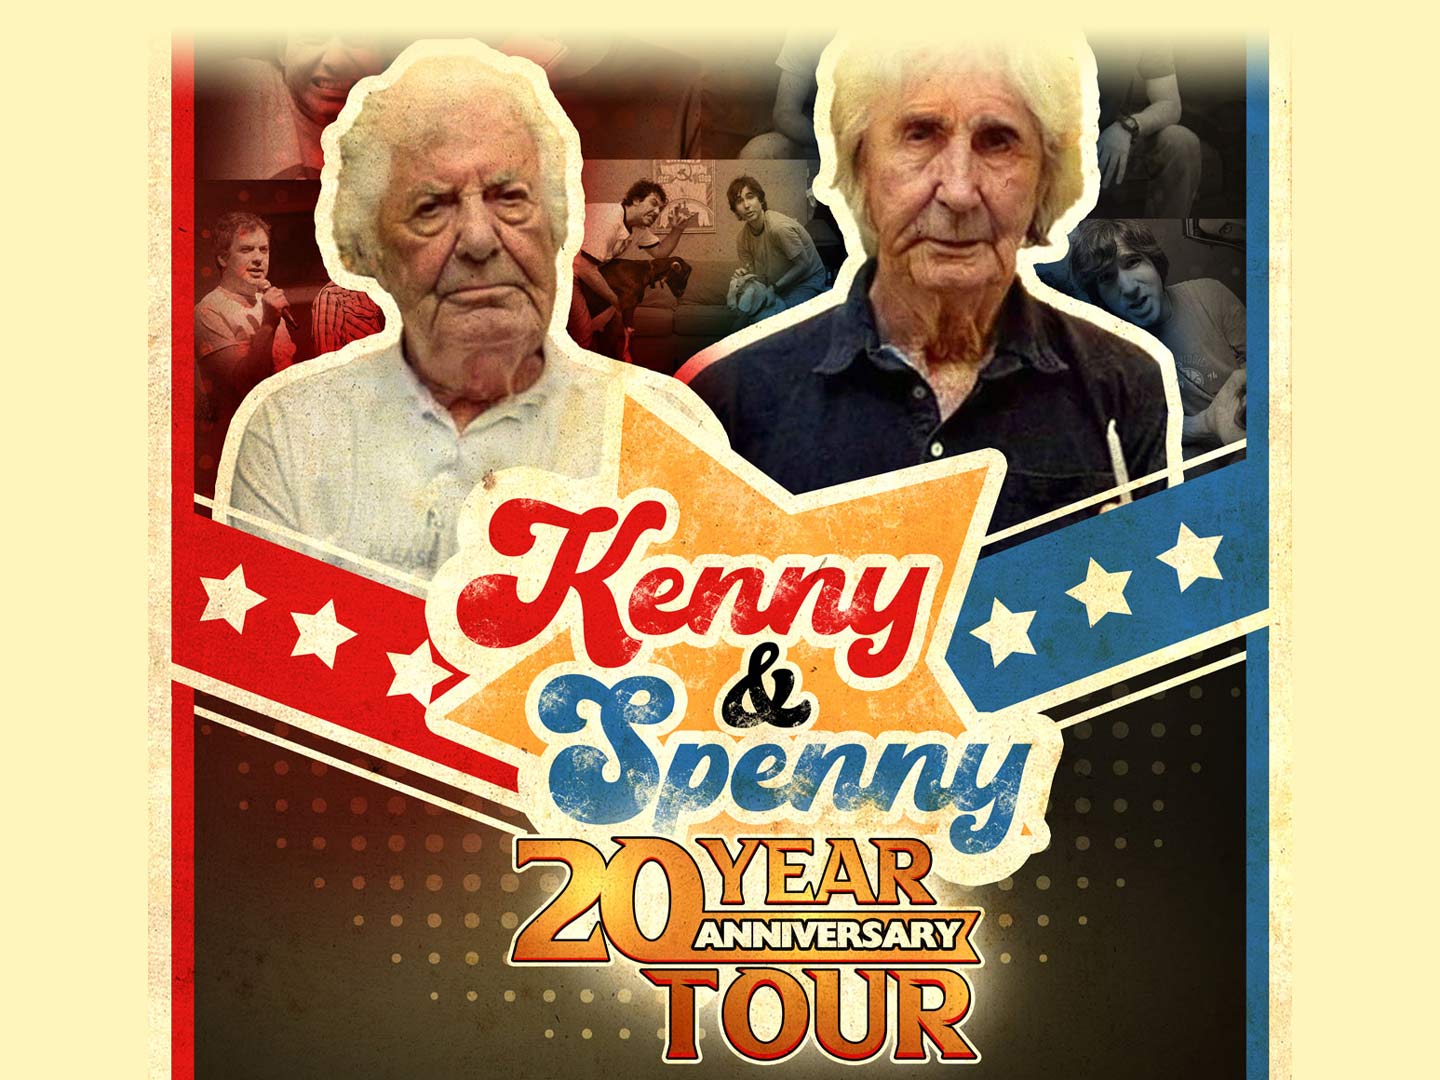 Kenny Vs Spenny 20 Year Anniversary Tour